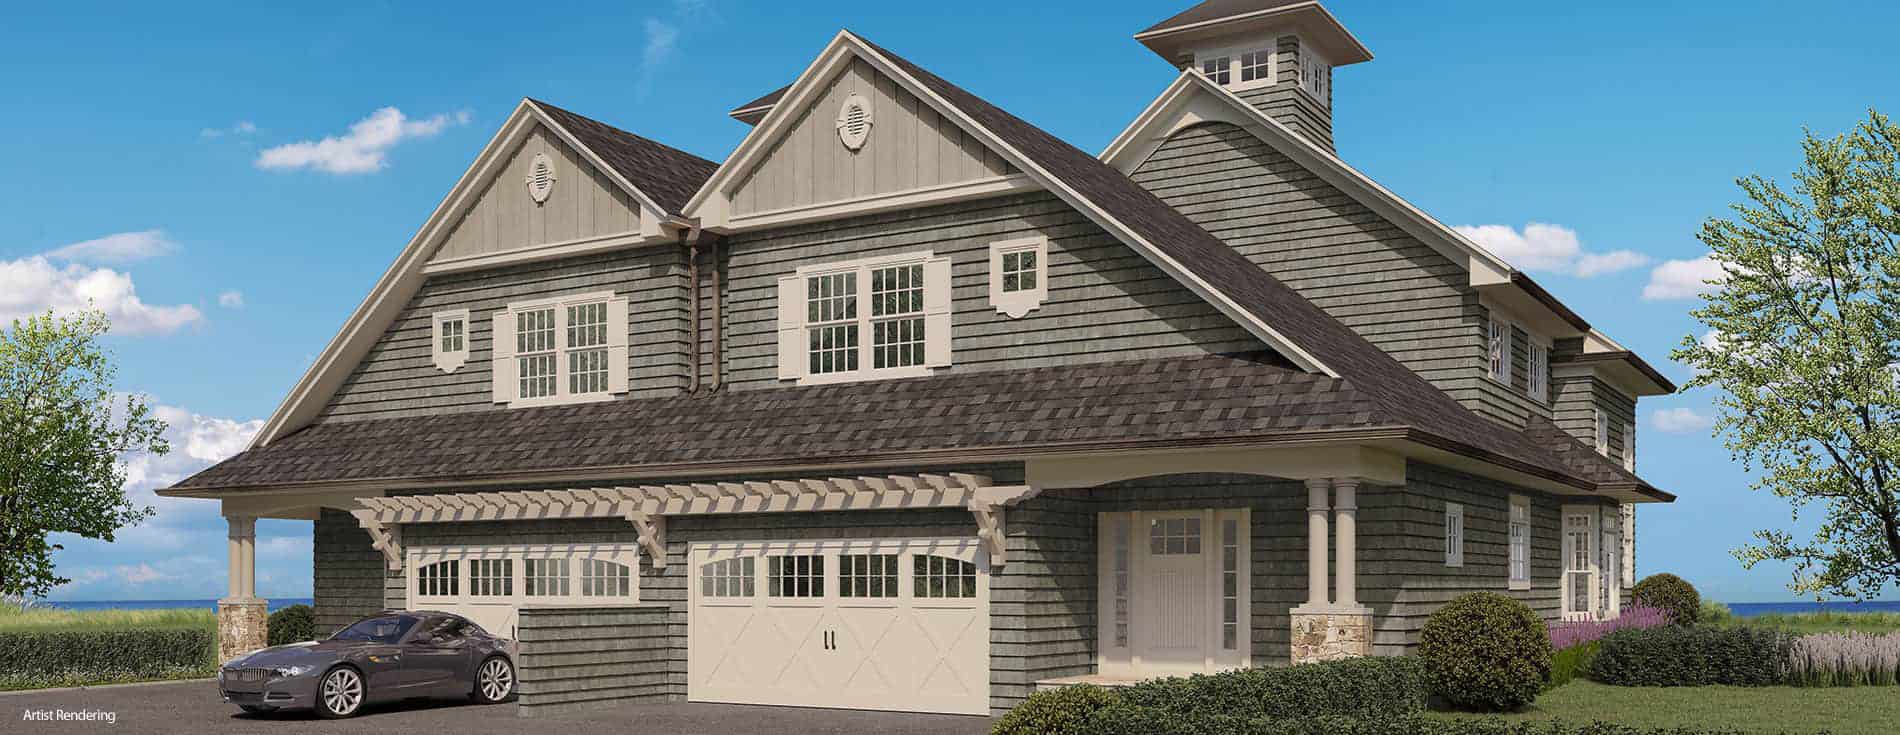 Indian Hills Town House Rendering